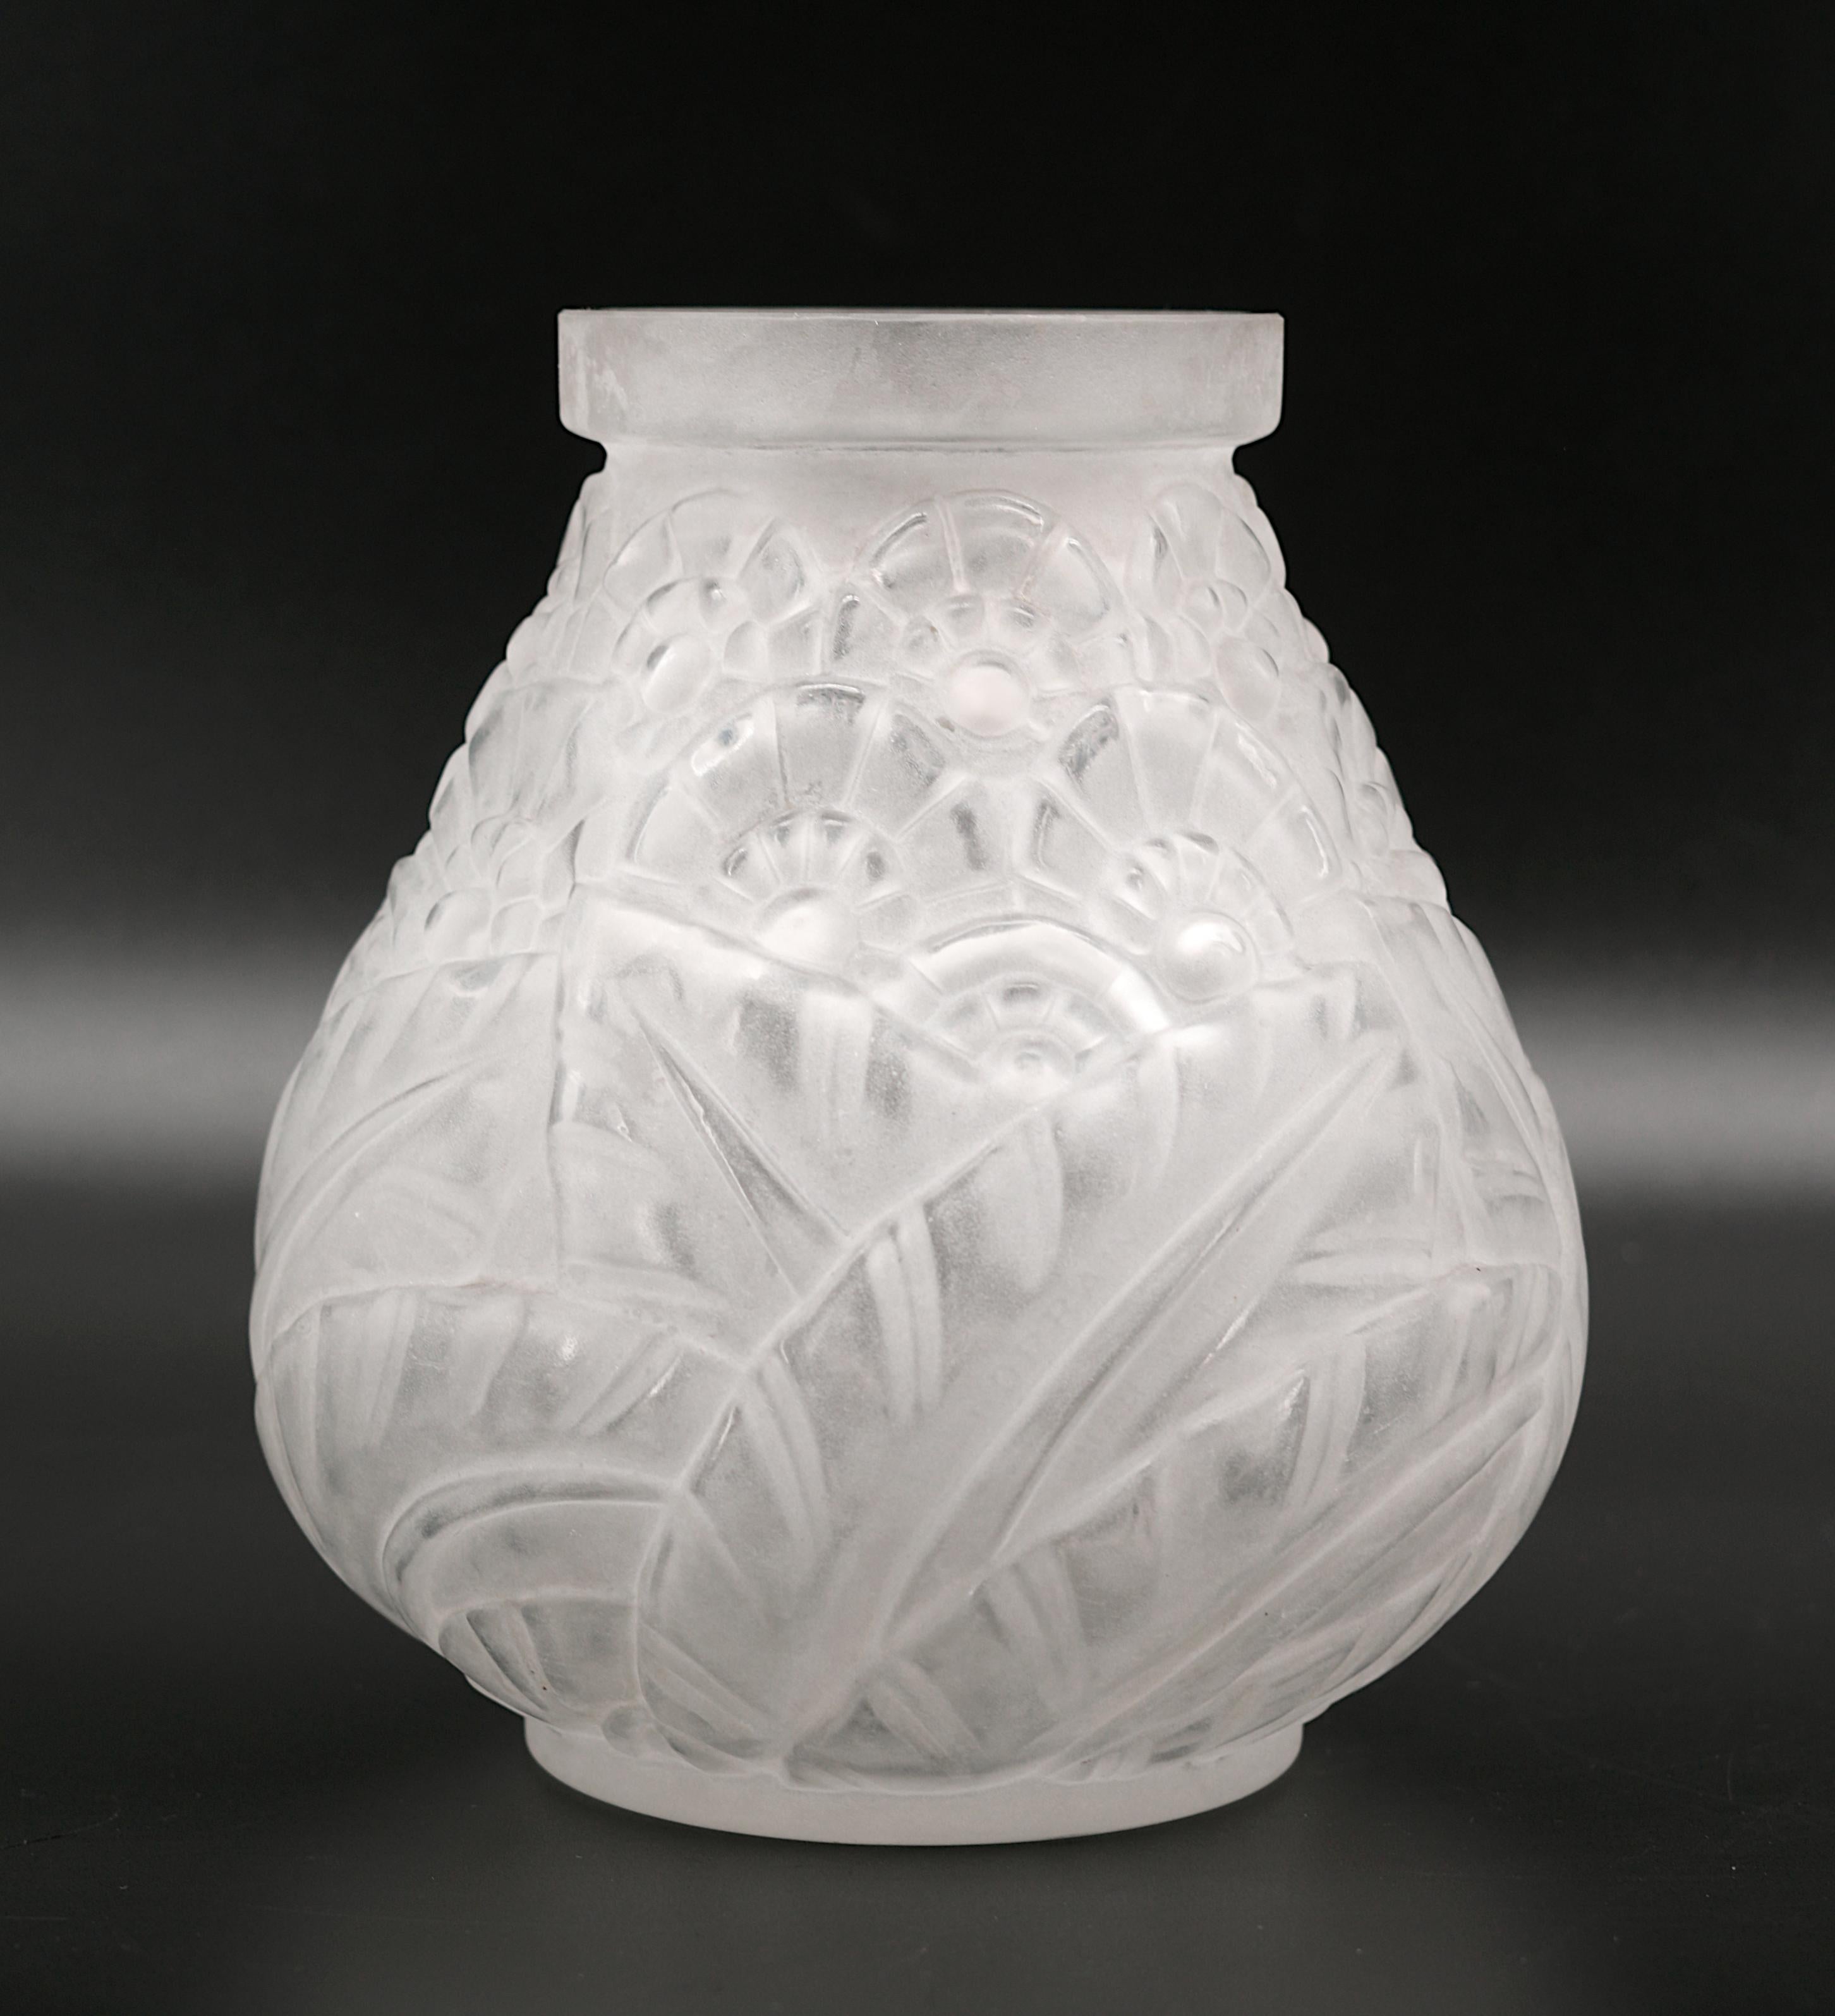 French Art Deco frosted molded glass vase by Daum, Nancy, France, late 1920s. Height: 7.7